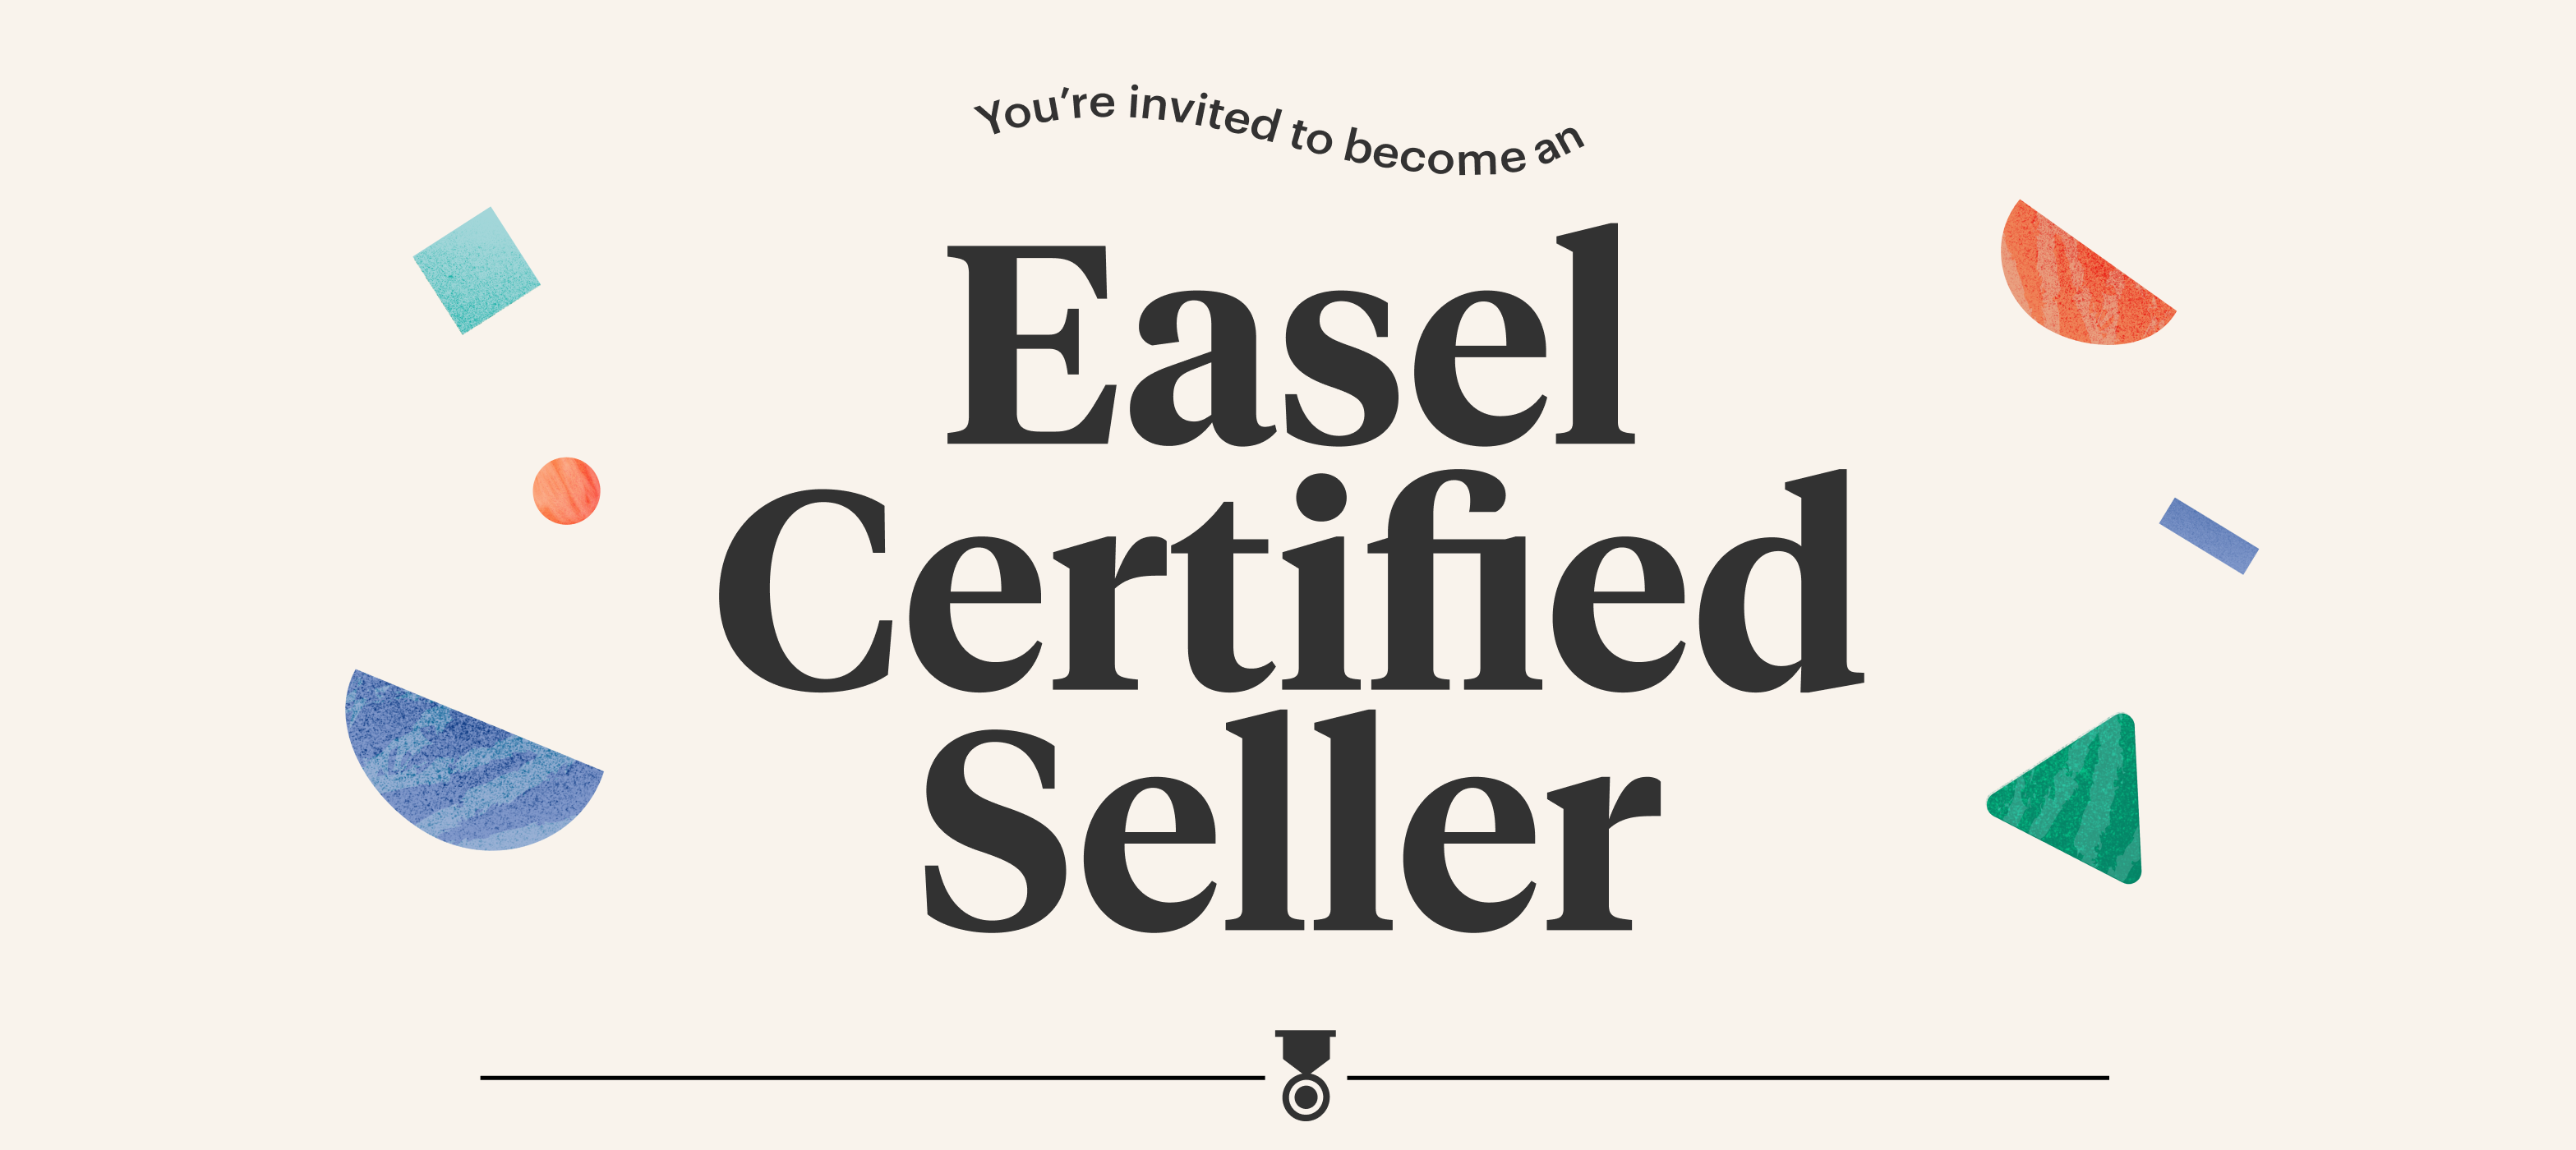 Become an Easel Certified Seller